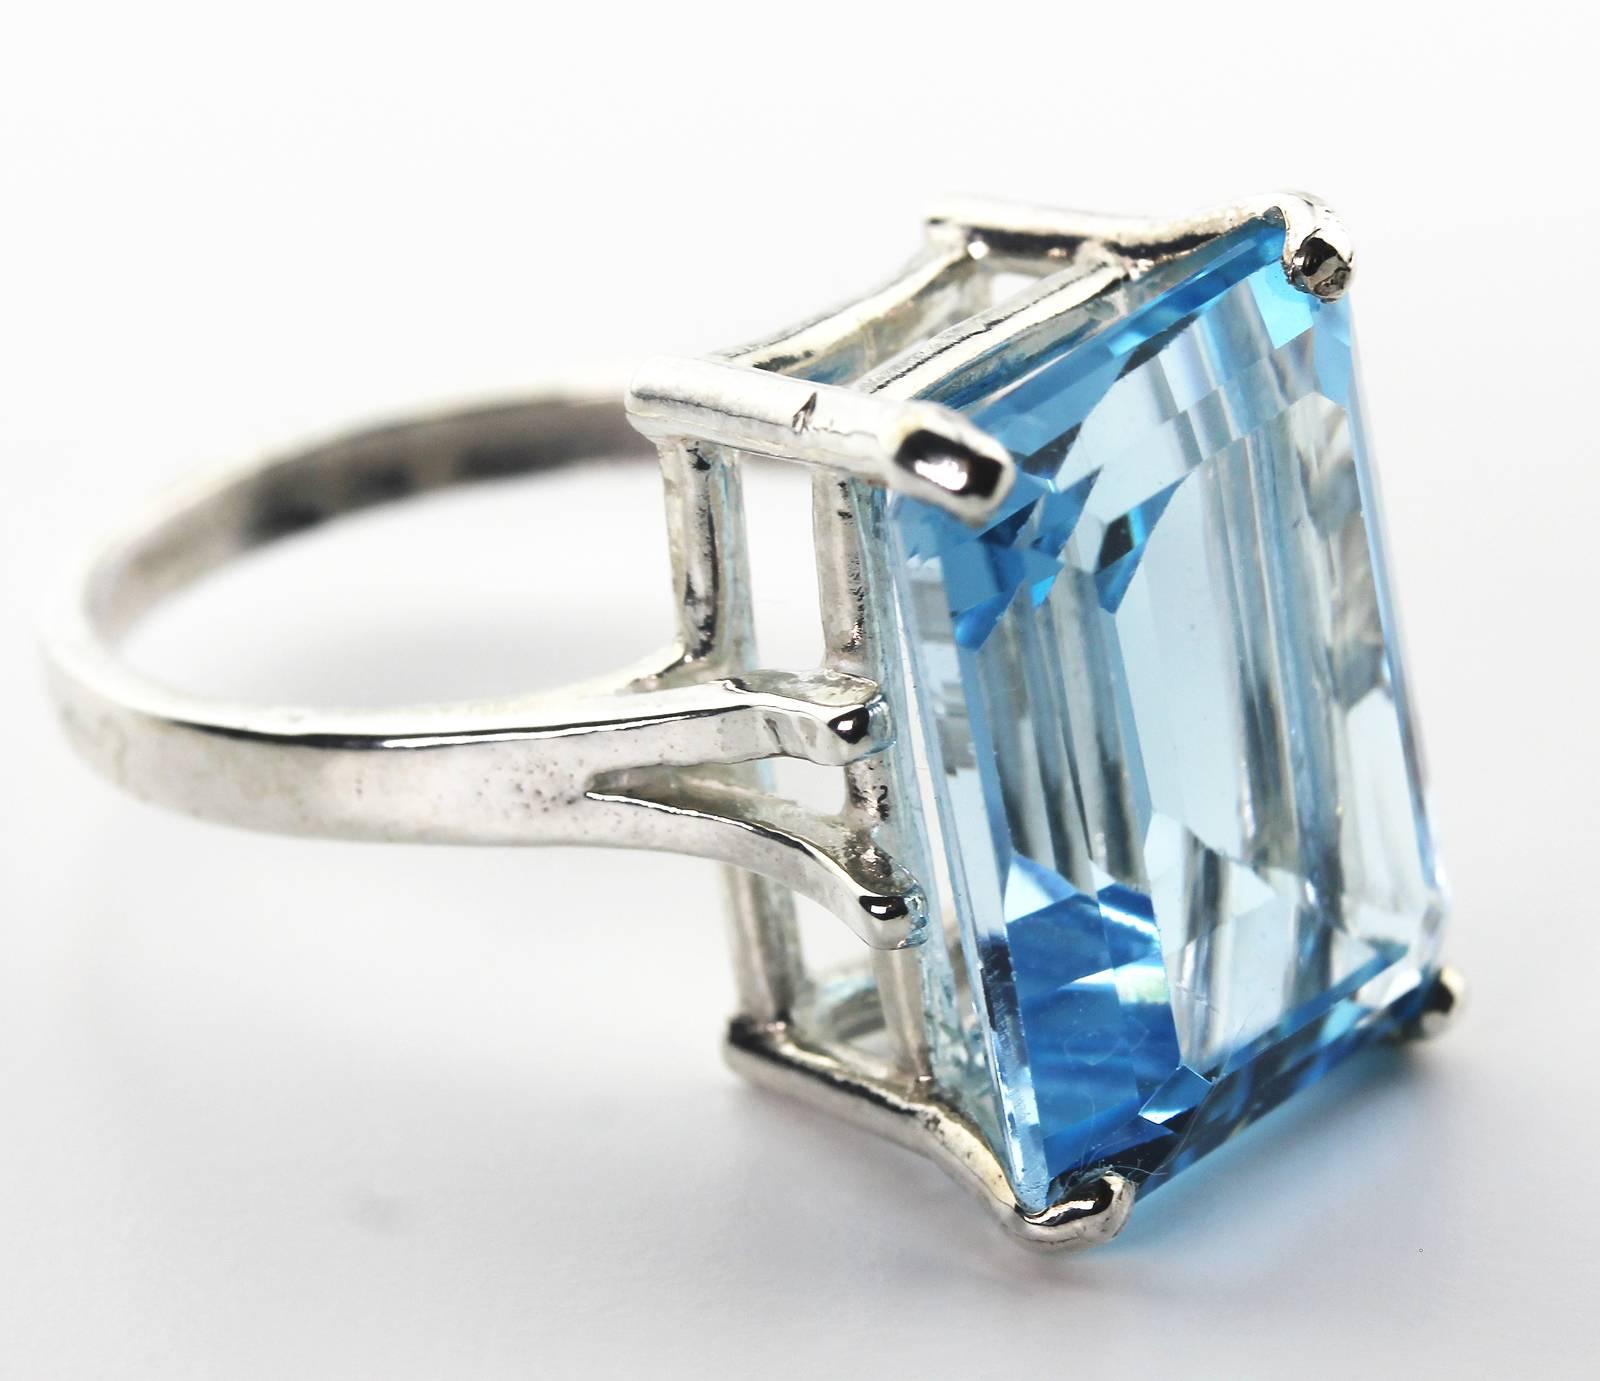 Flawless glittering 18 Carat translucent brilliant emerald cut blue Topaz ring set in Sterling Silver.  The ring is a sizable 7.  The gemstone measures 17.9mm x 13.2 mm or .519 inches x .70 inches.  